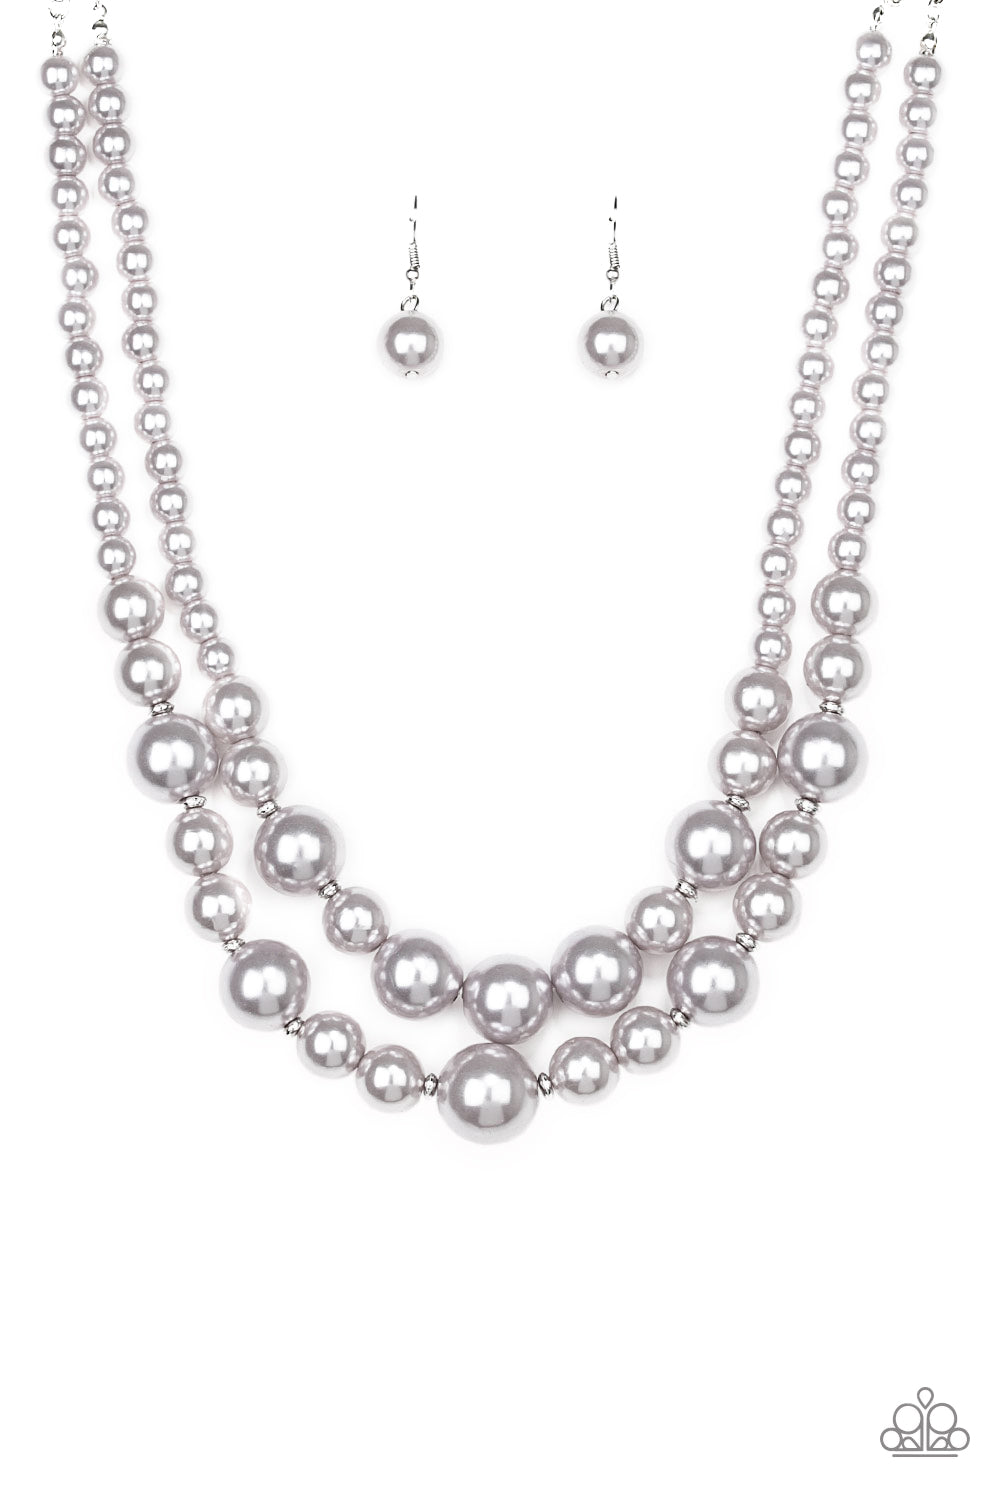 The More The Modest - Silver Necklace Earring Set Paparazzi 1041